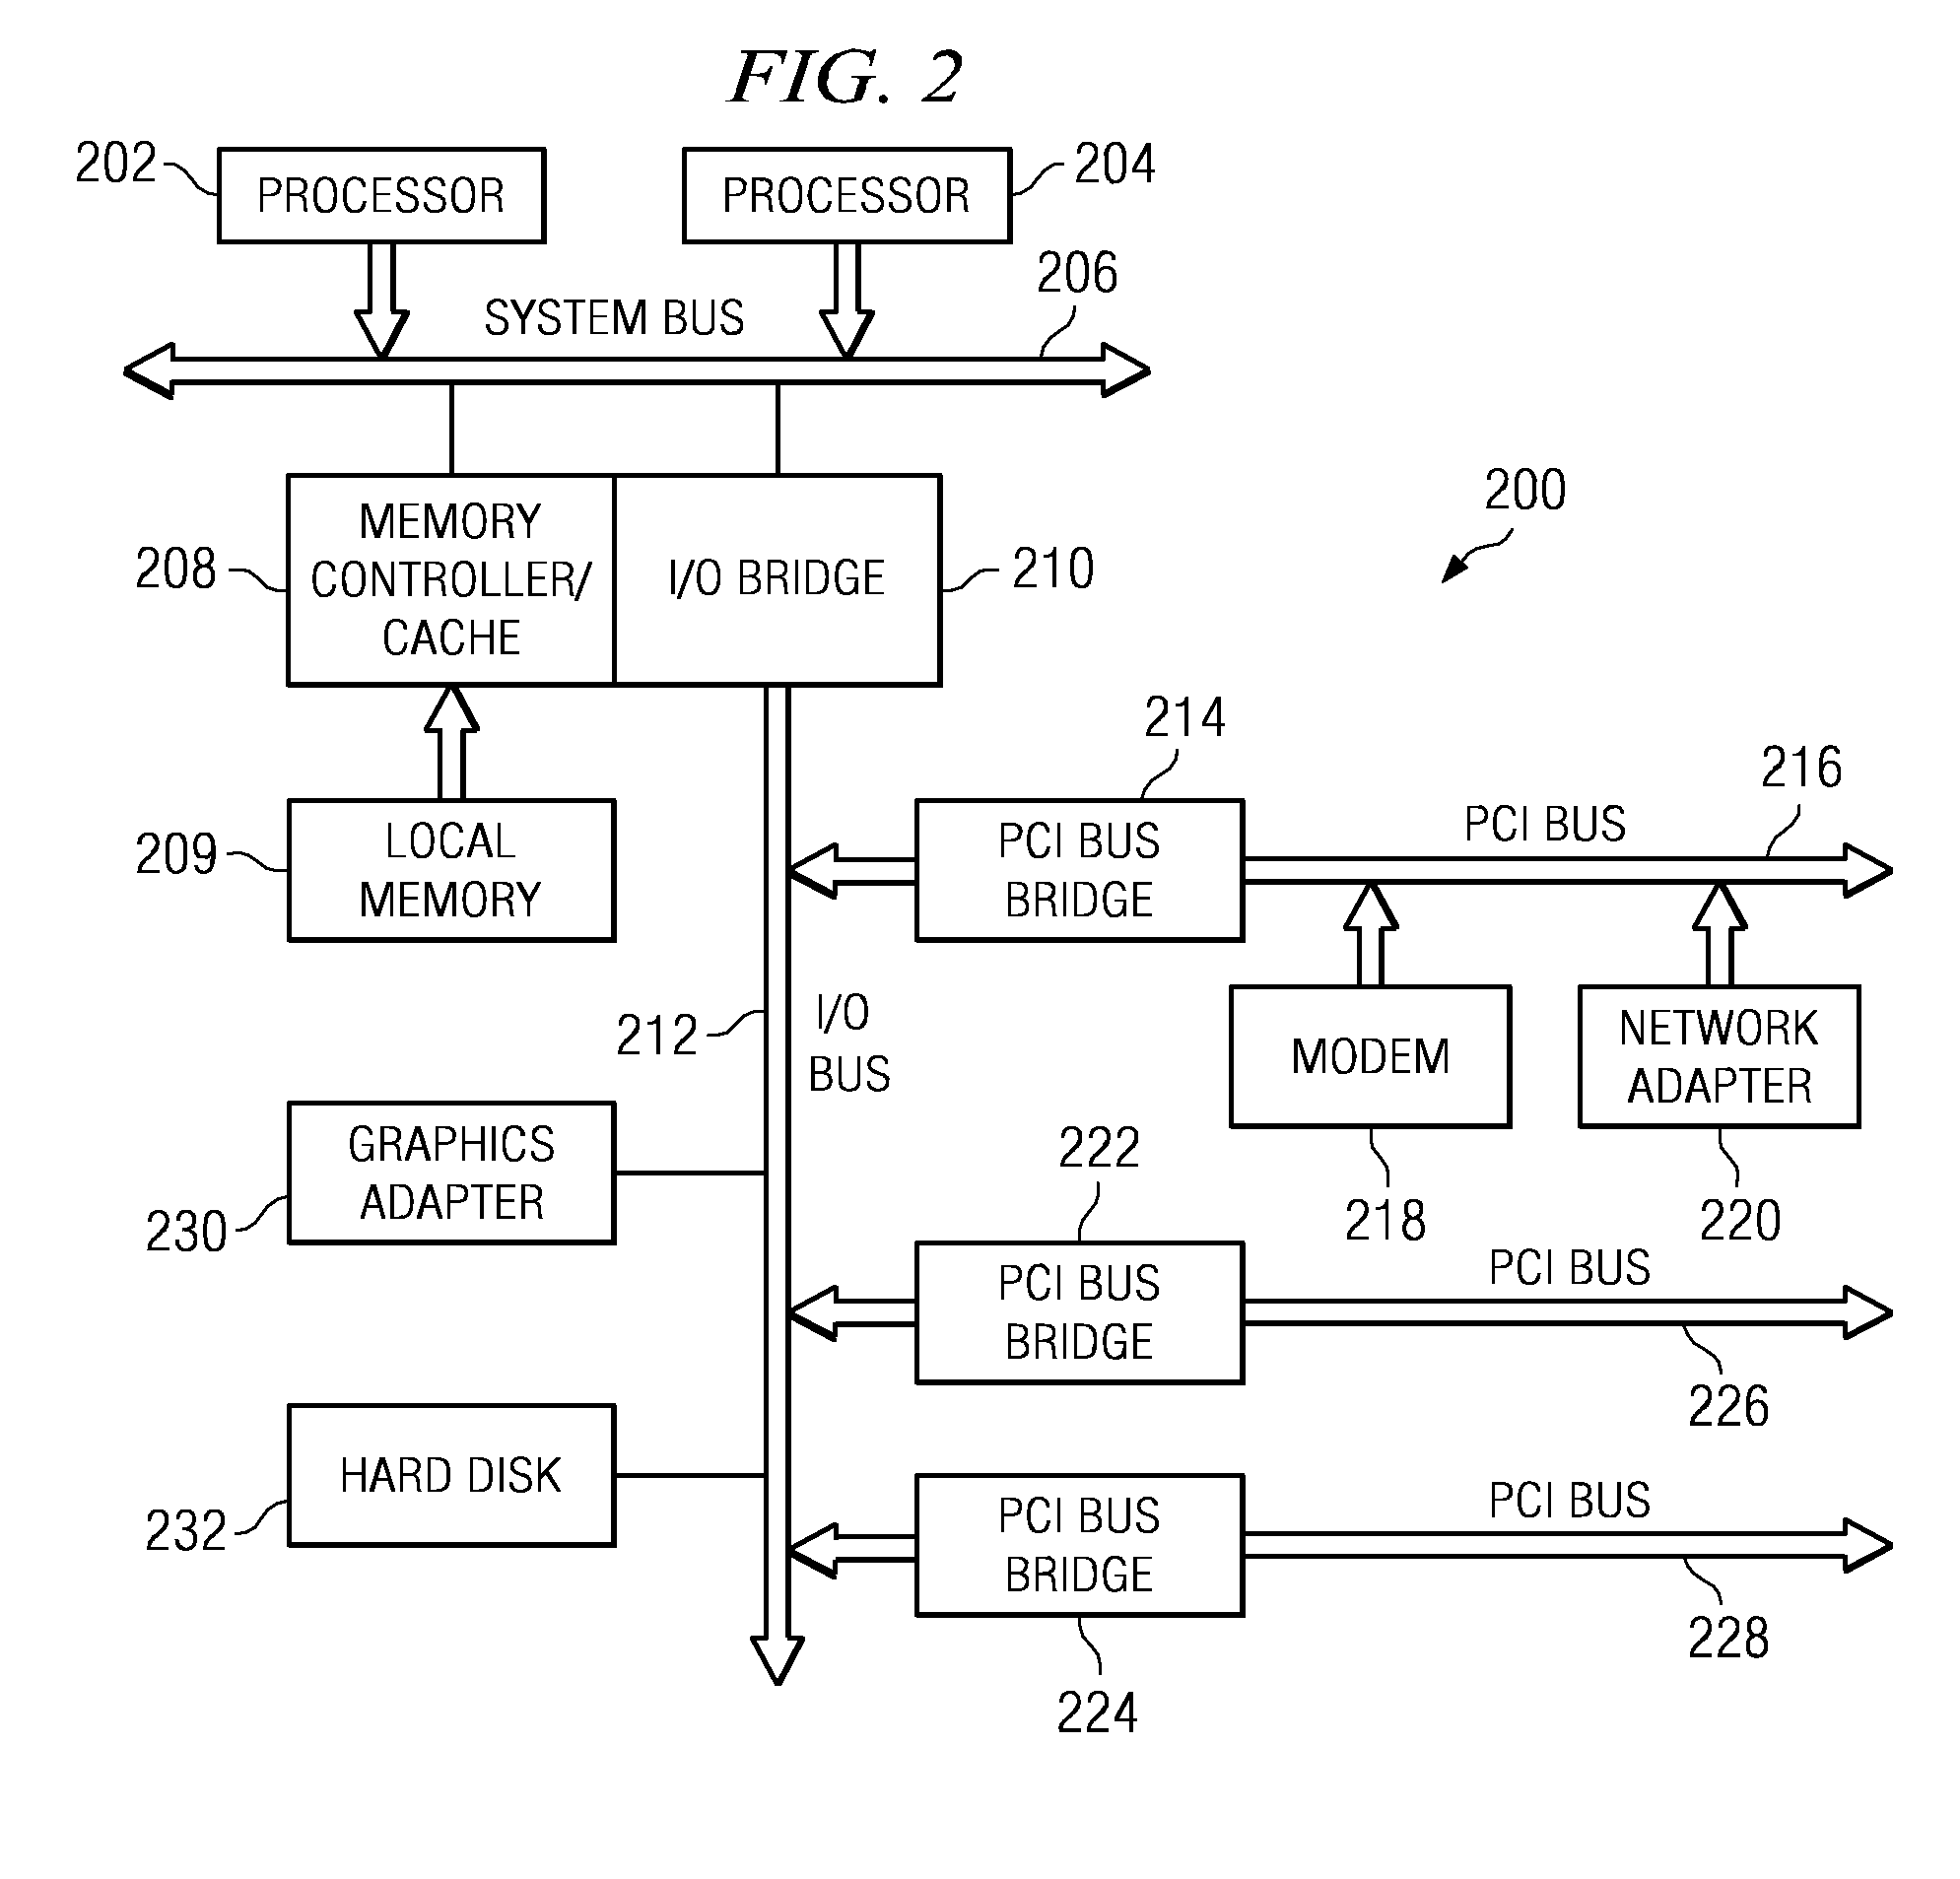 System and Method of Error Recovery for Backup Applications